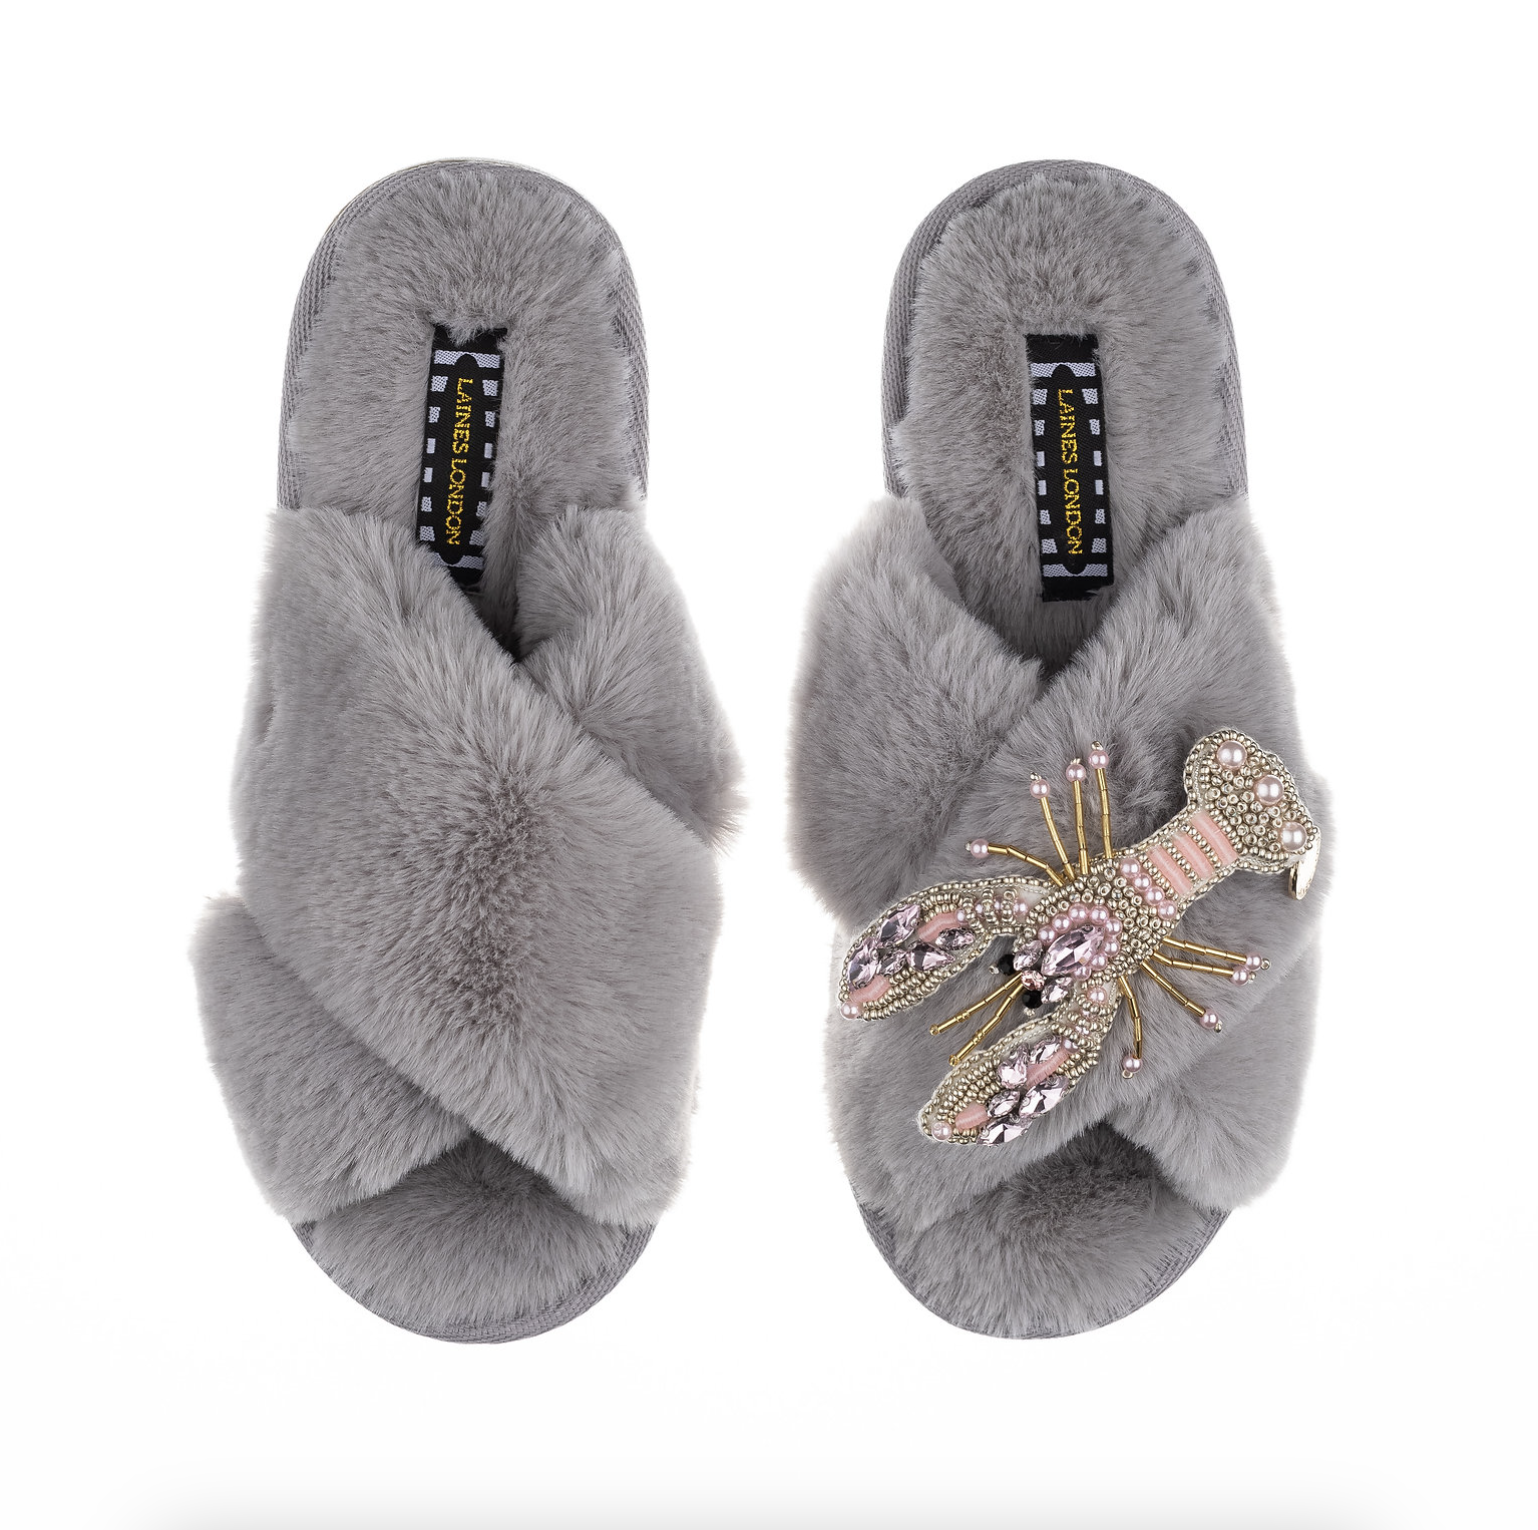 Laines London Classic Slipper With Lobster Brooch - Grey